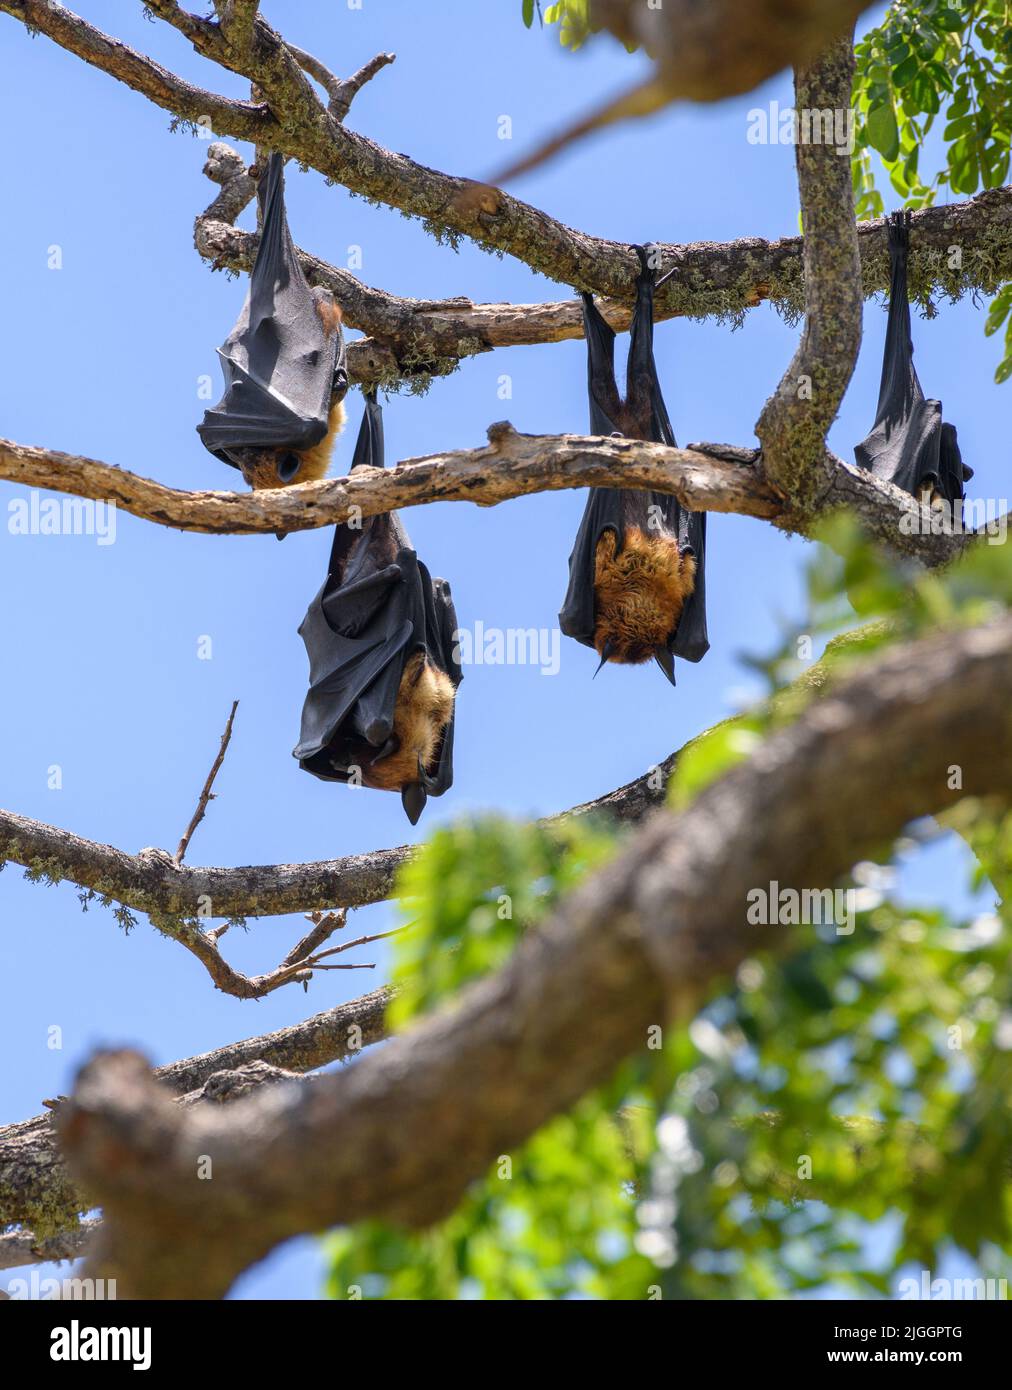 Sri Lankan megabats roosting upside down on a tree branched Stock Photo